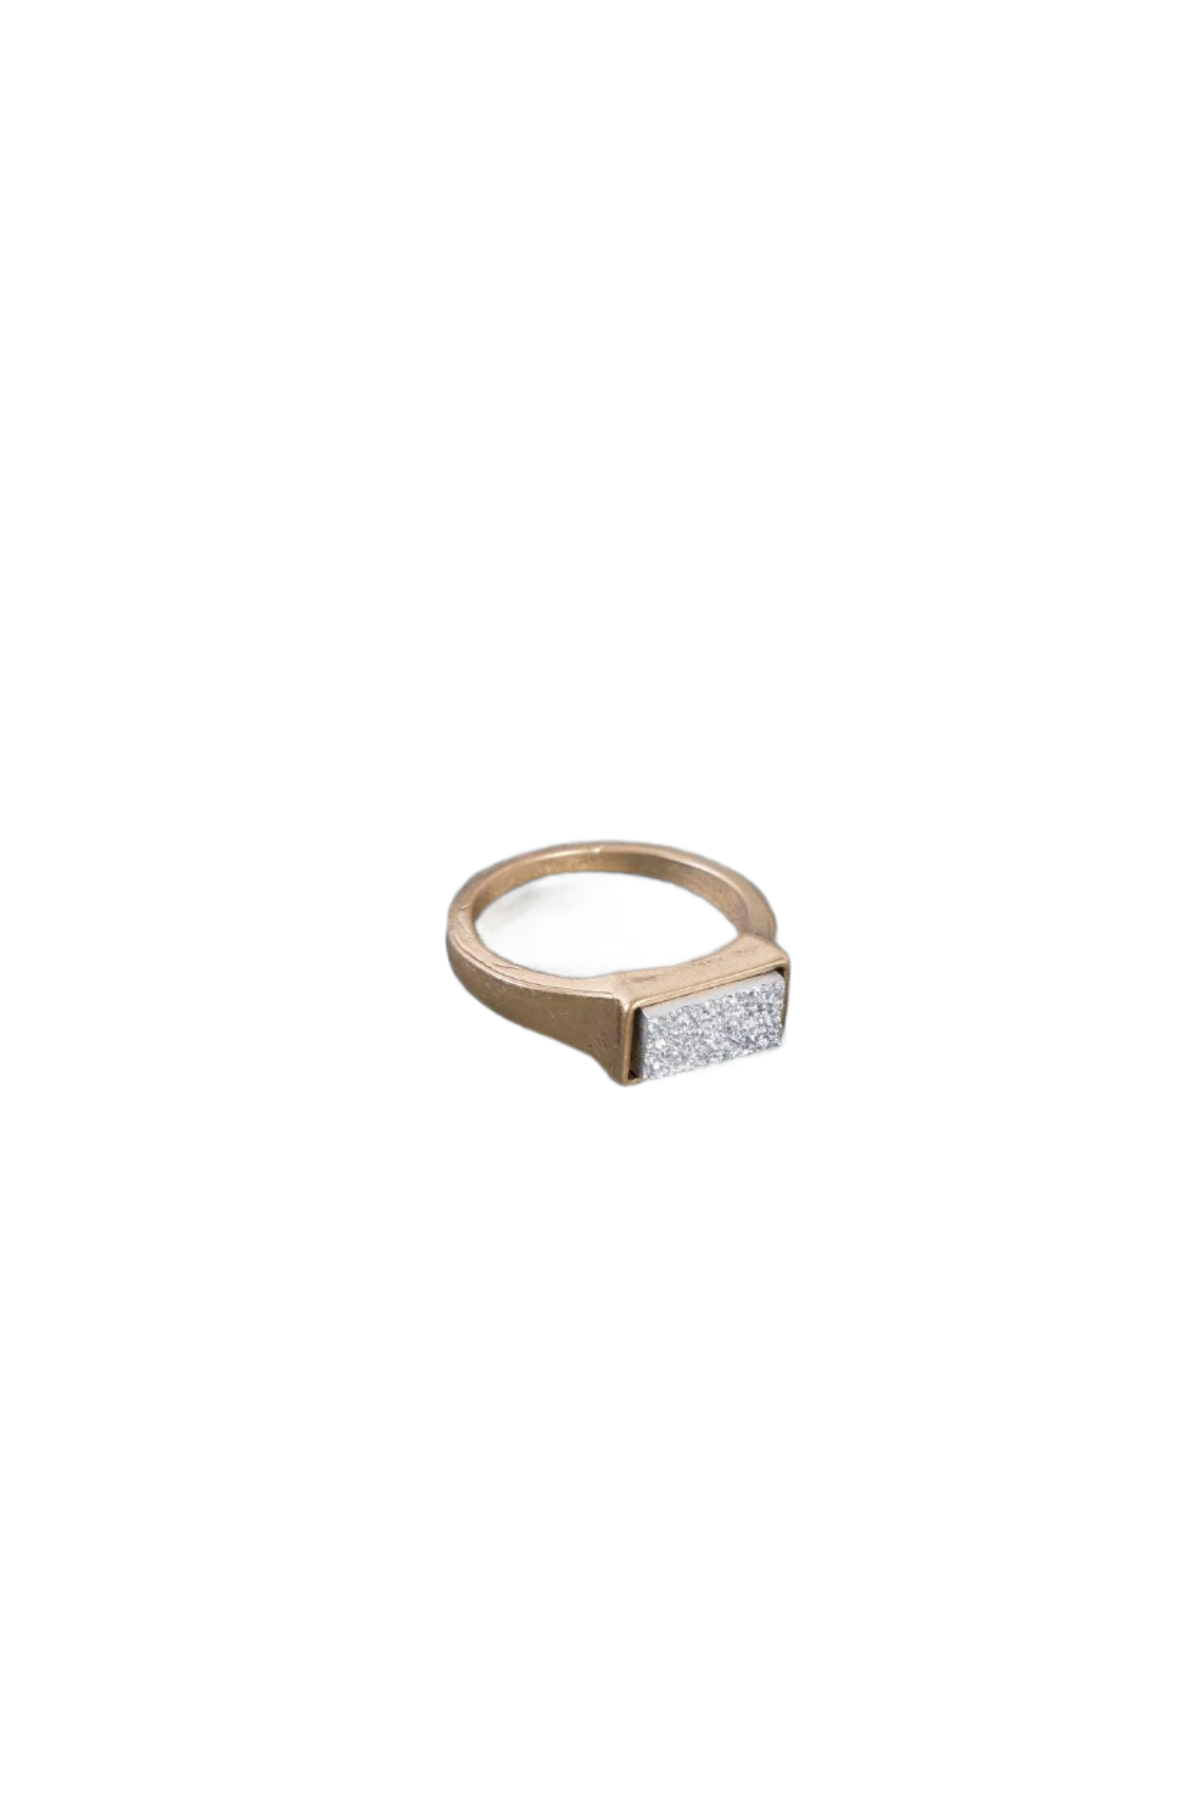 Silver Rectangle Druzy Stone Ring